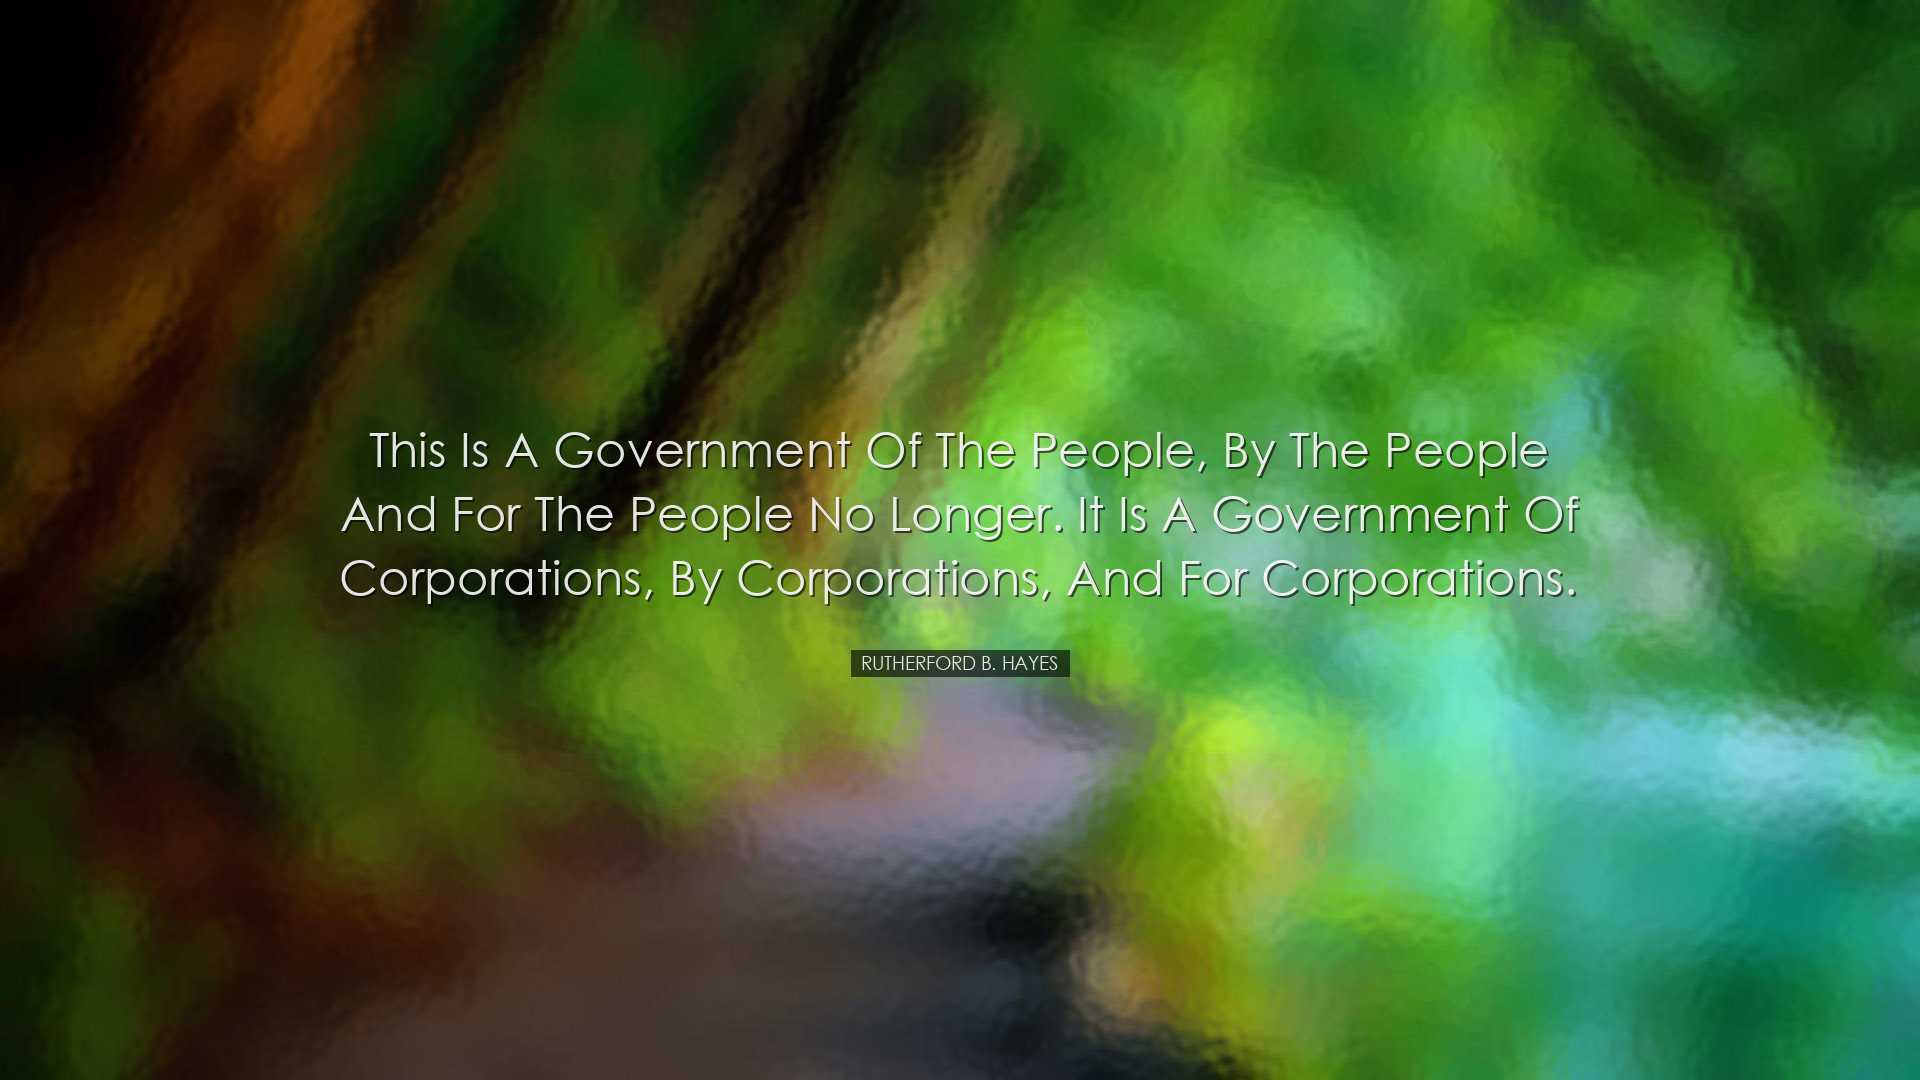 This is a government of the people, by the people and for the peop